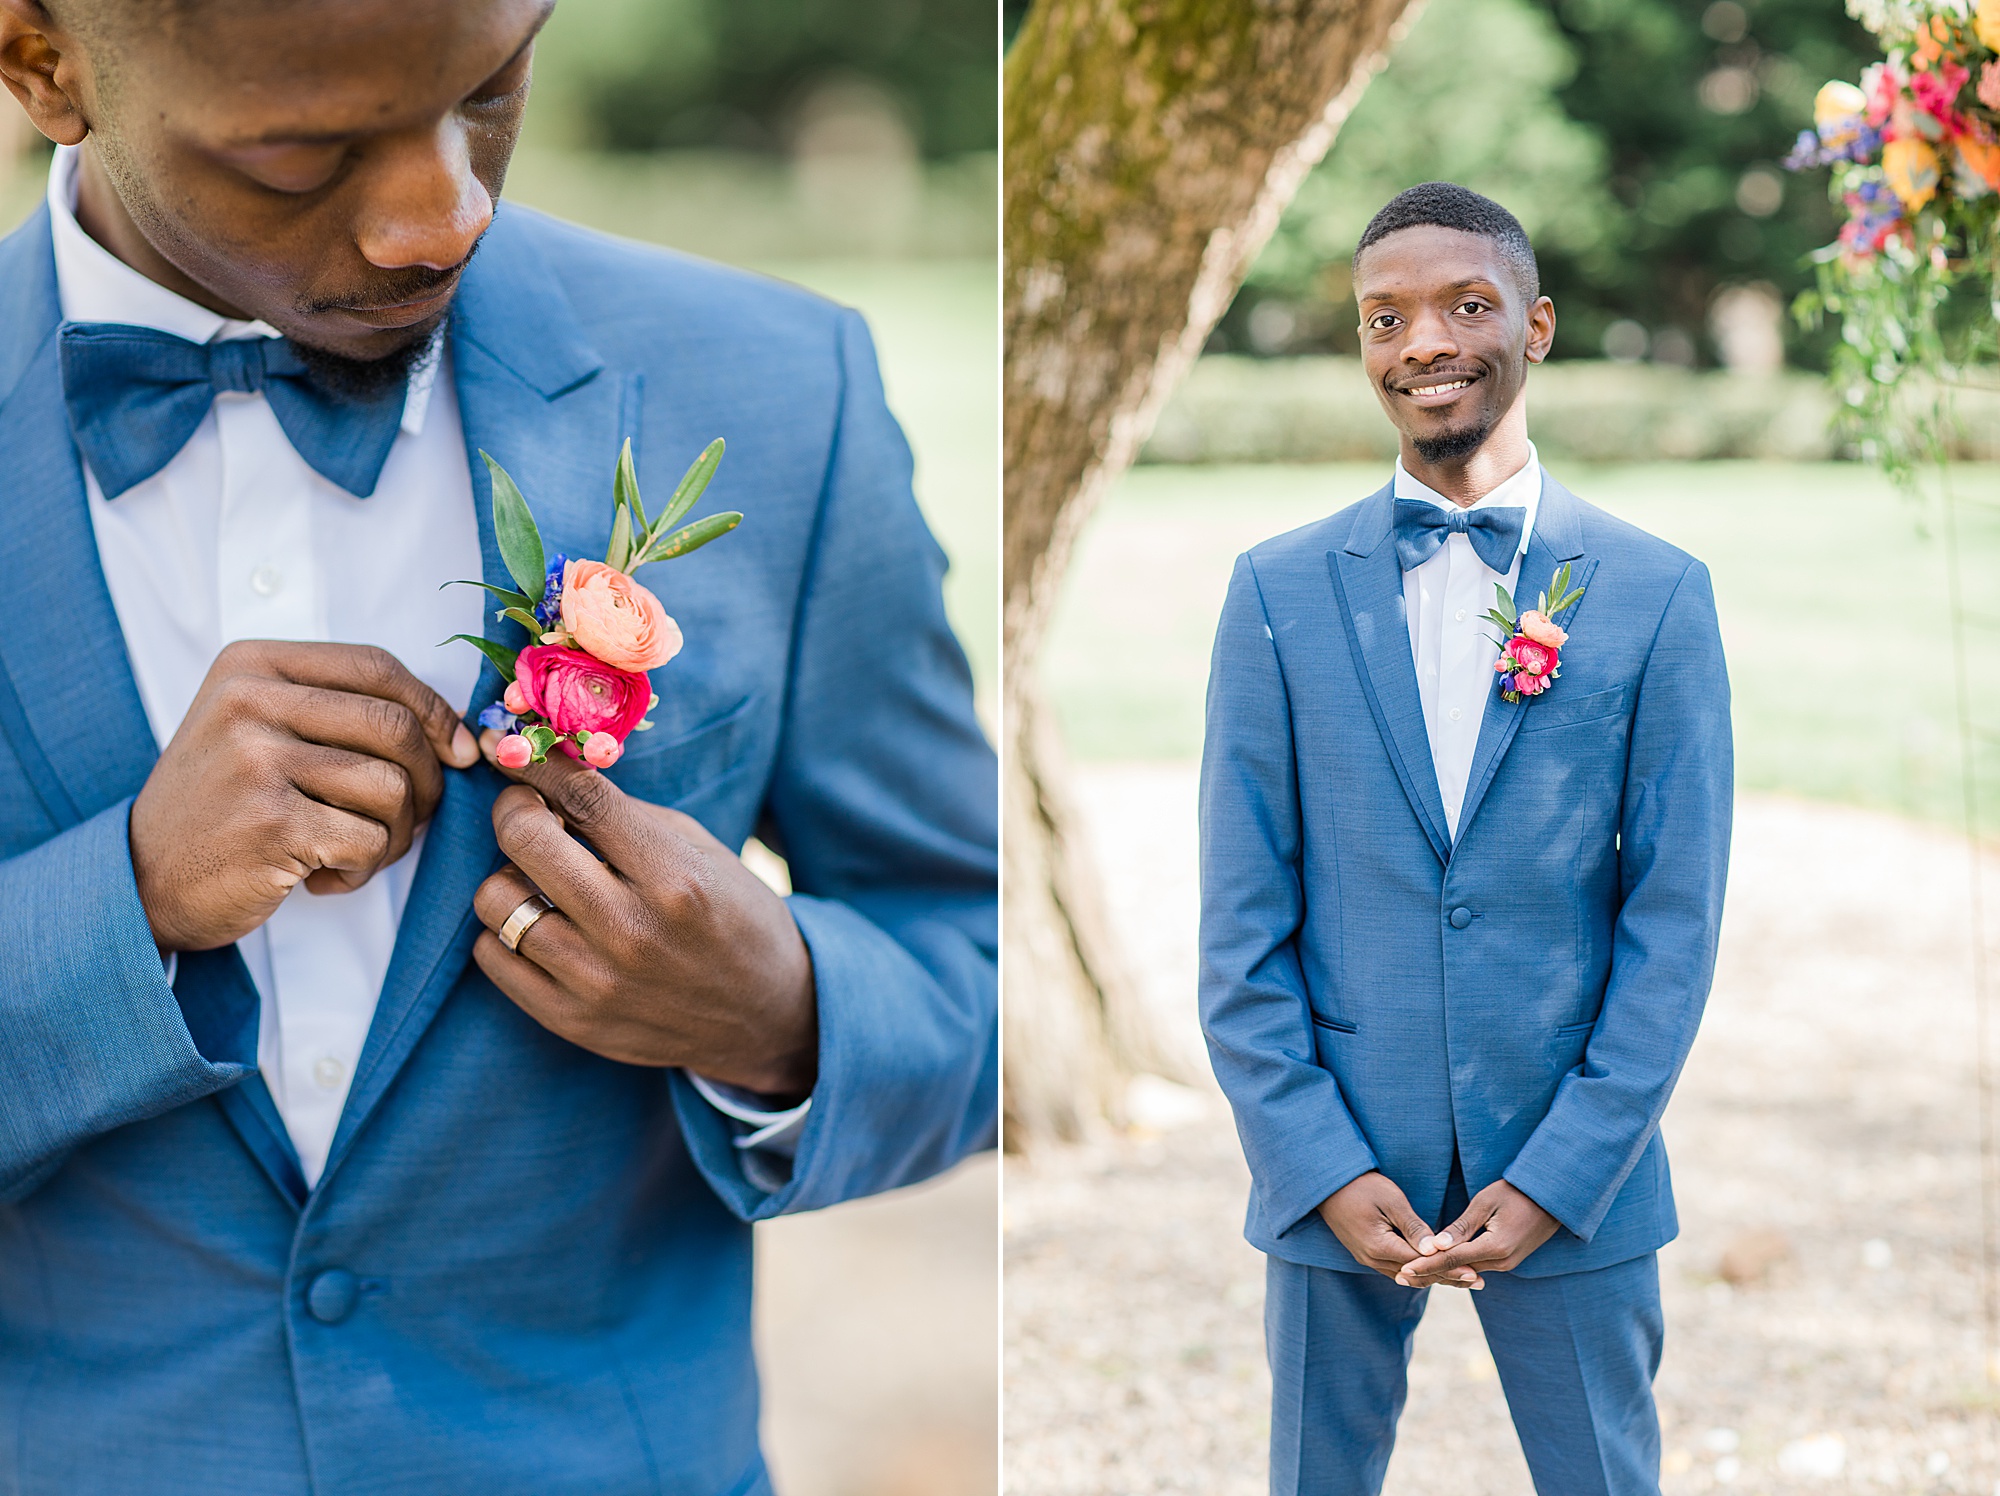 groom puts on boutonnière in navy suit